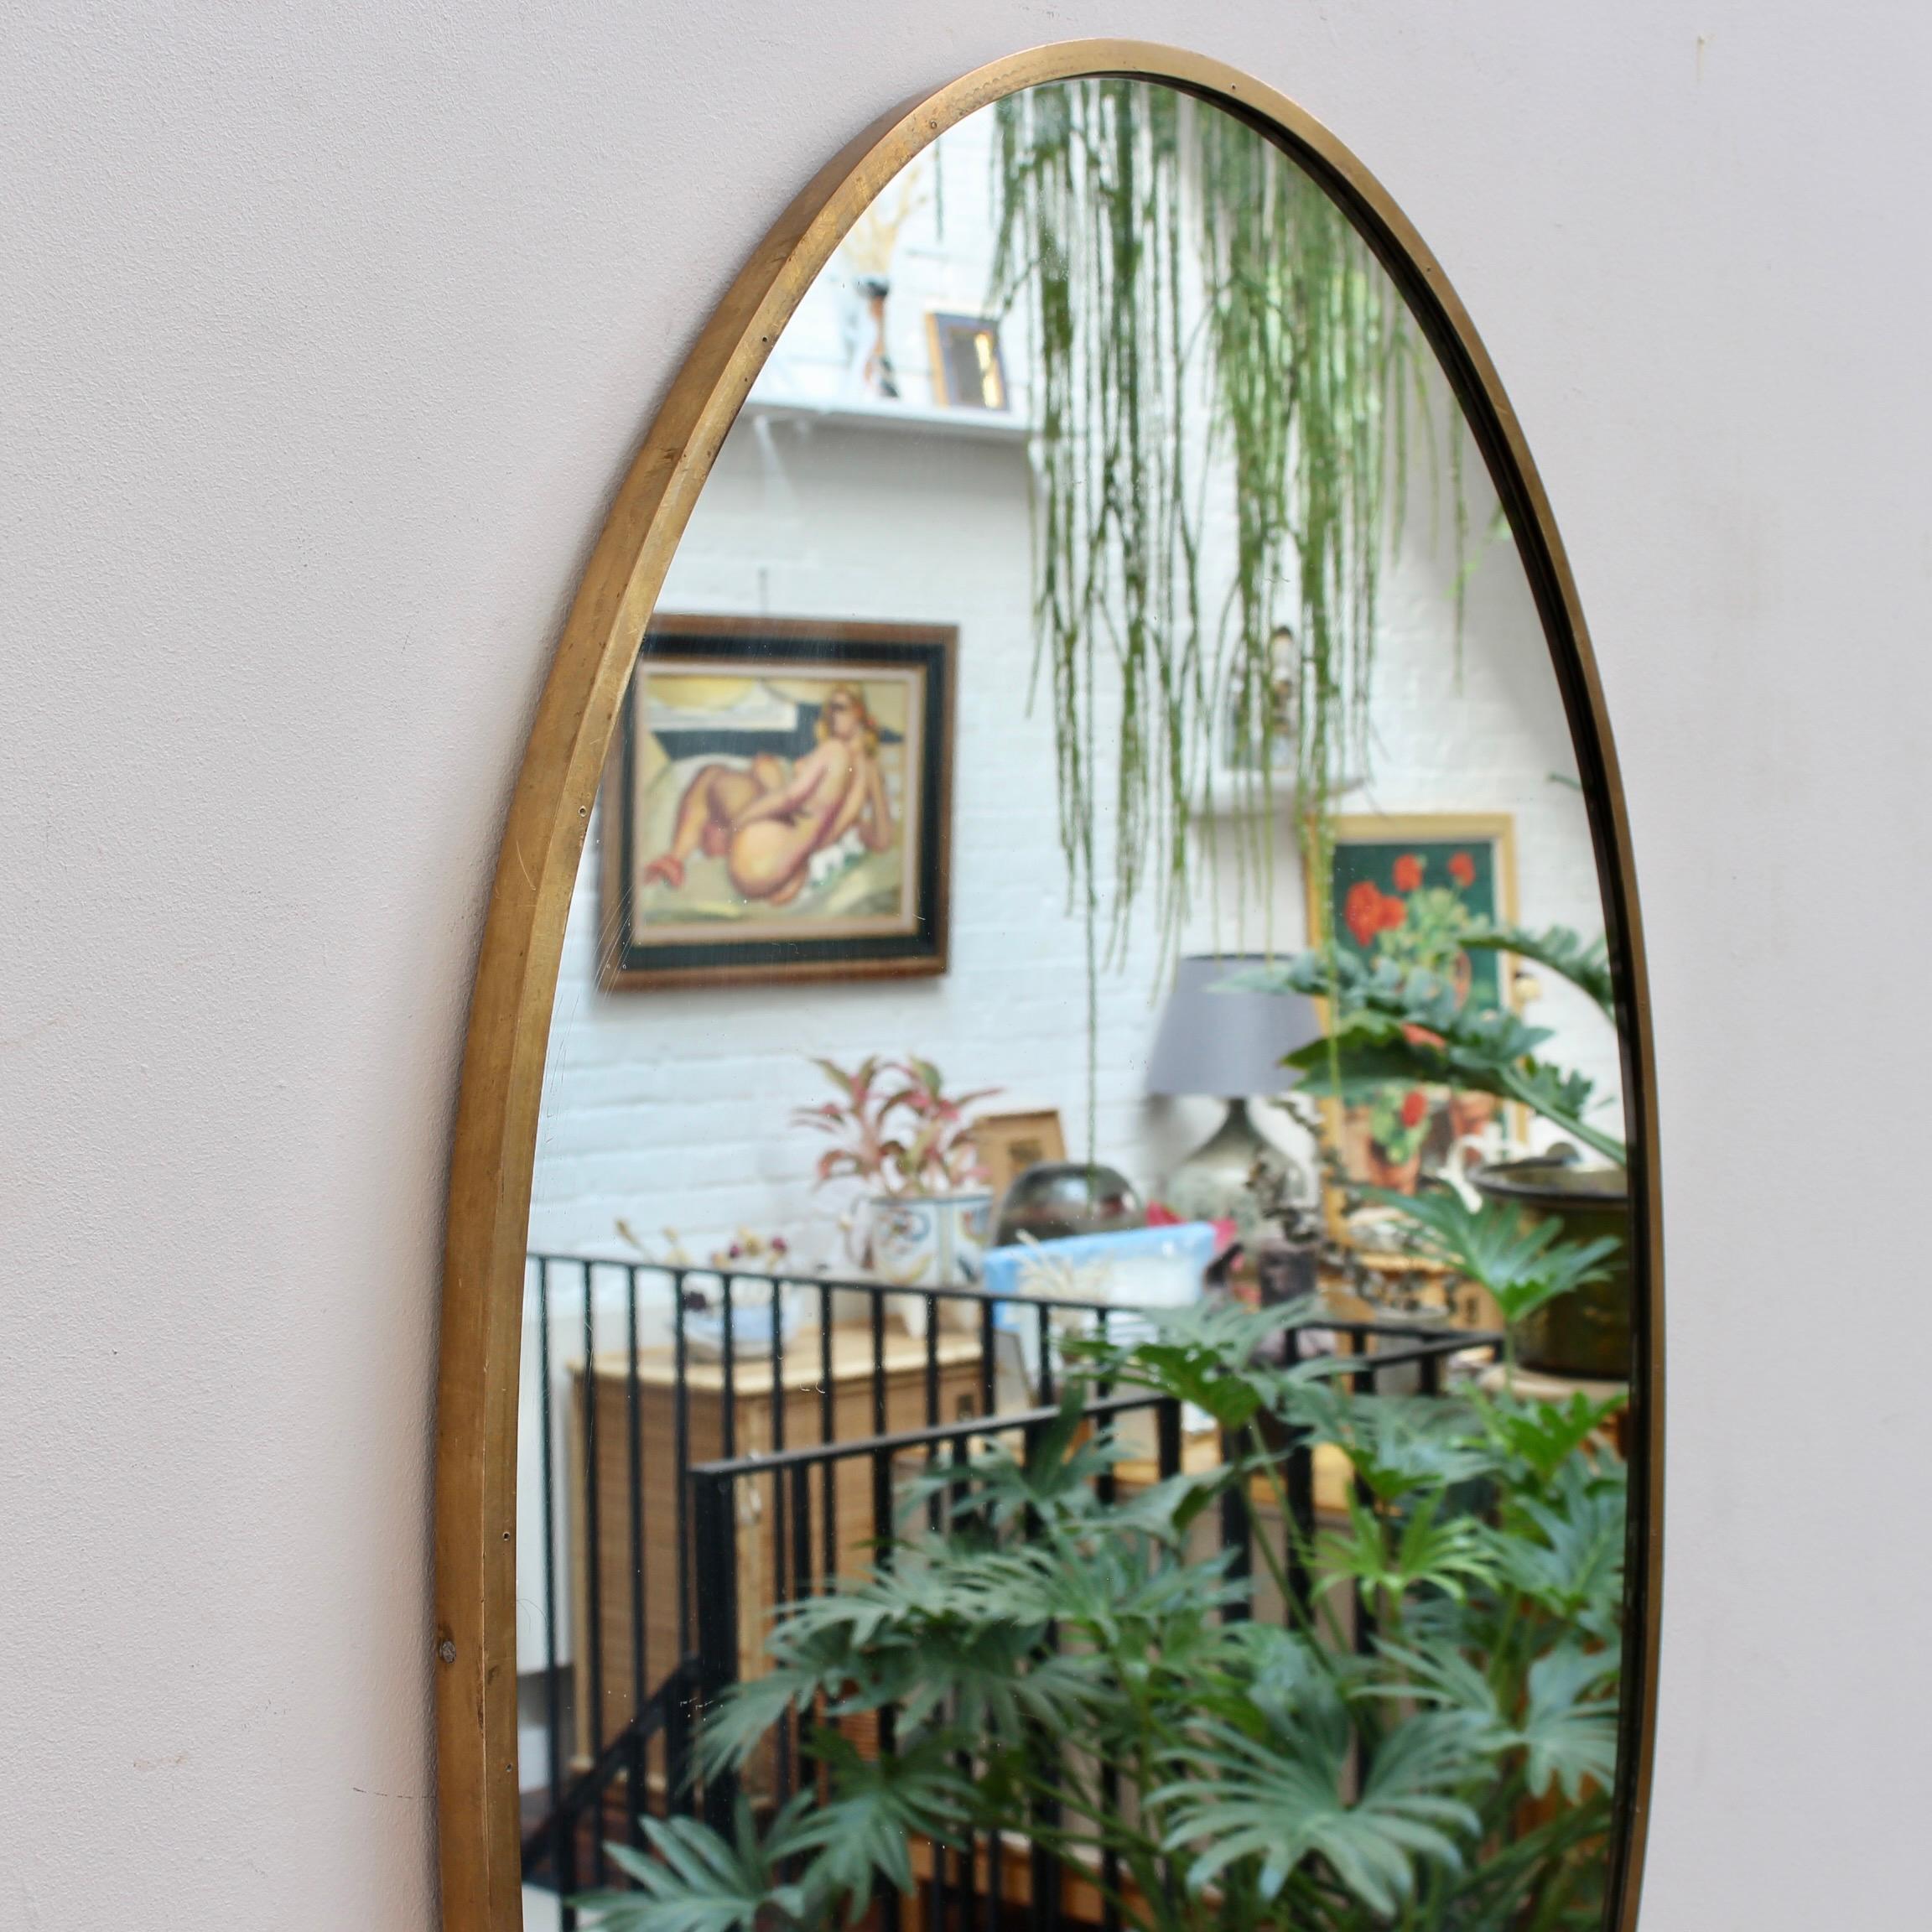 Mid-20th Century Vintage Italian Oval Wall Mirror with Brass Frame, 'circa 1950s'